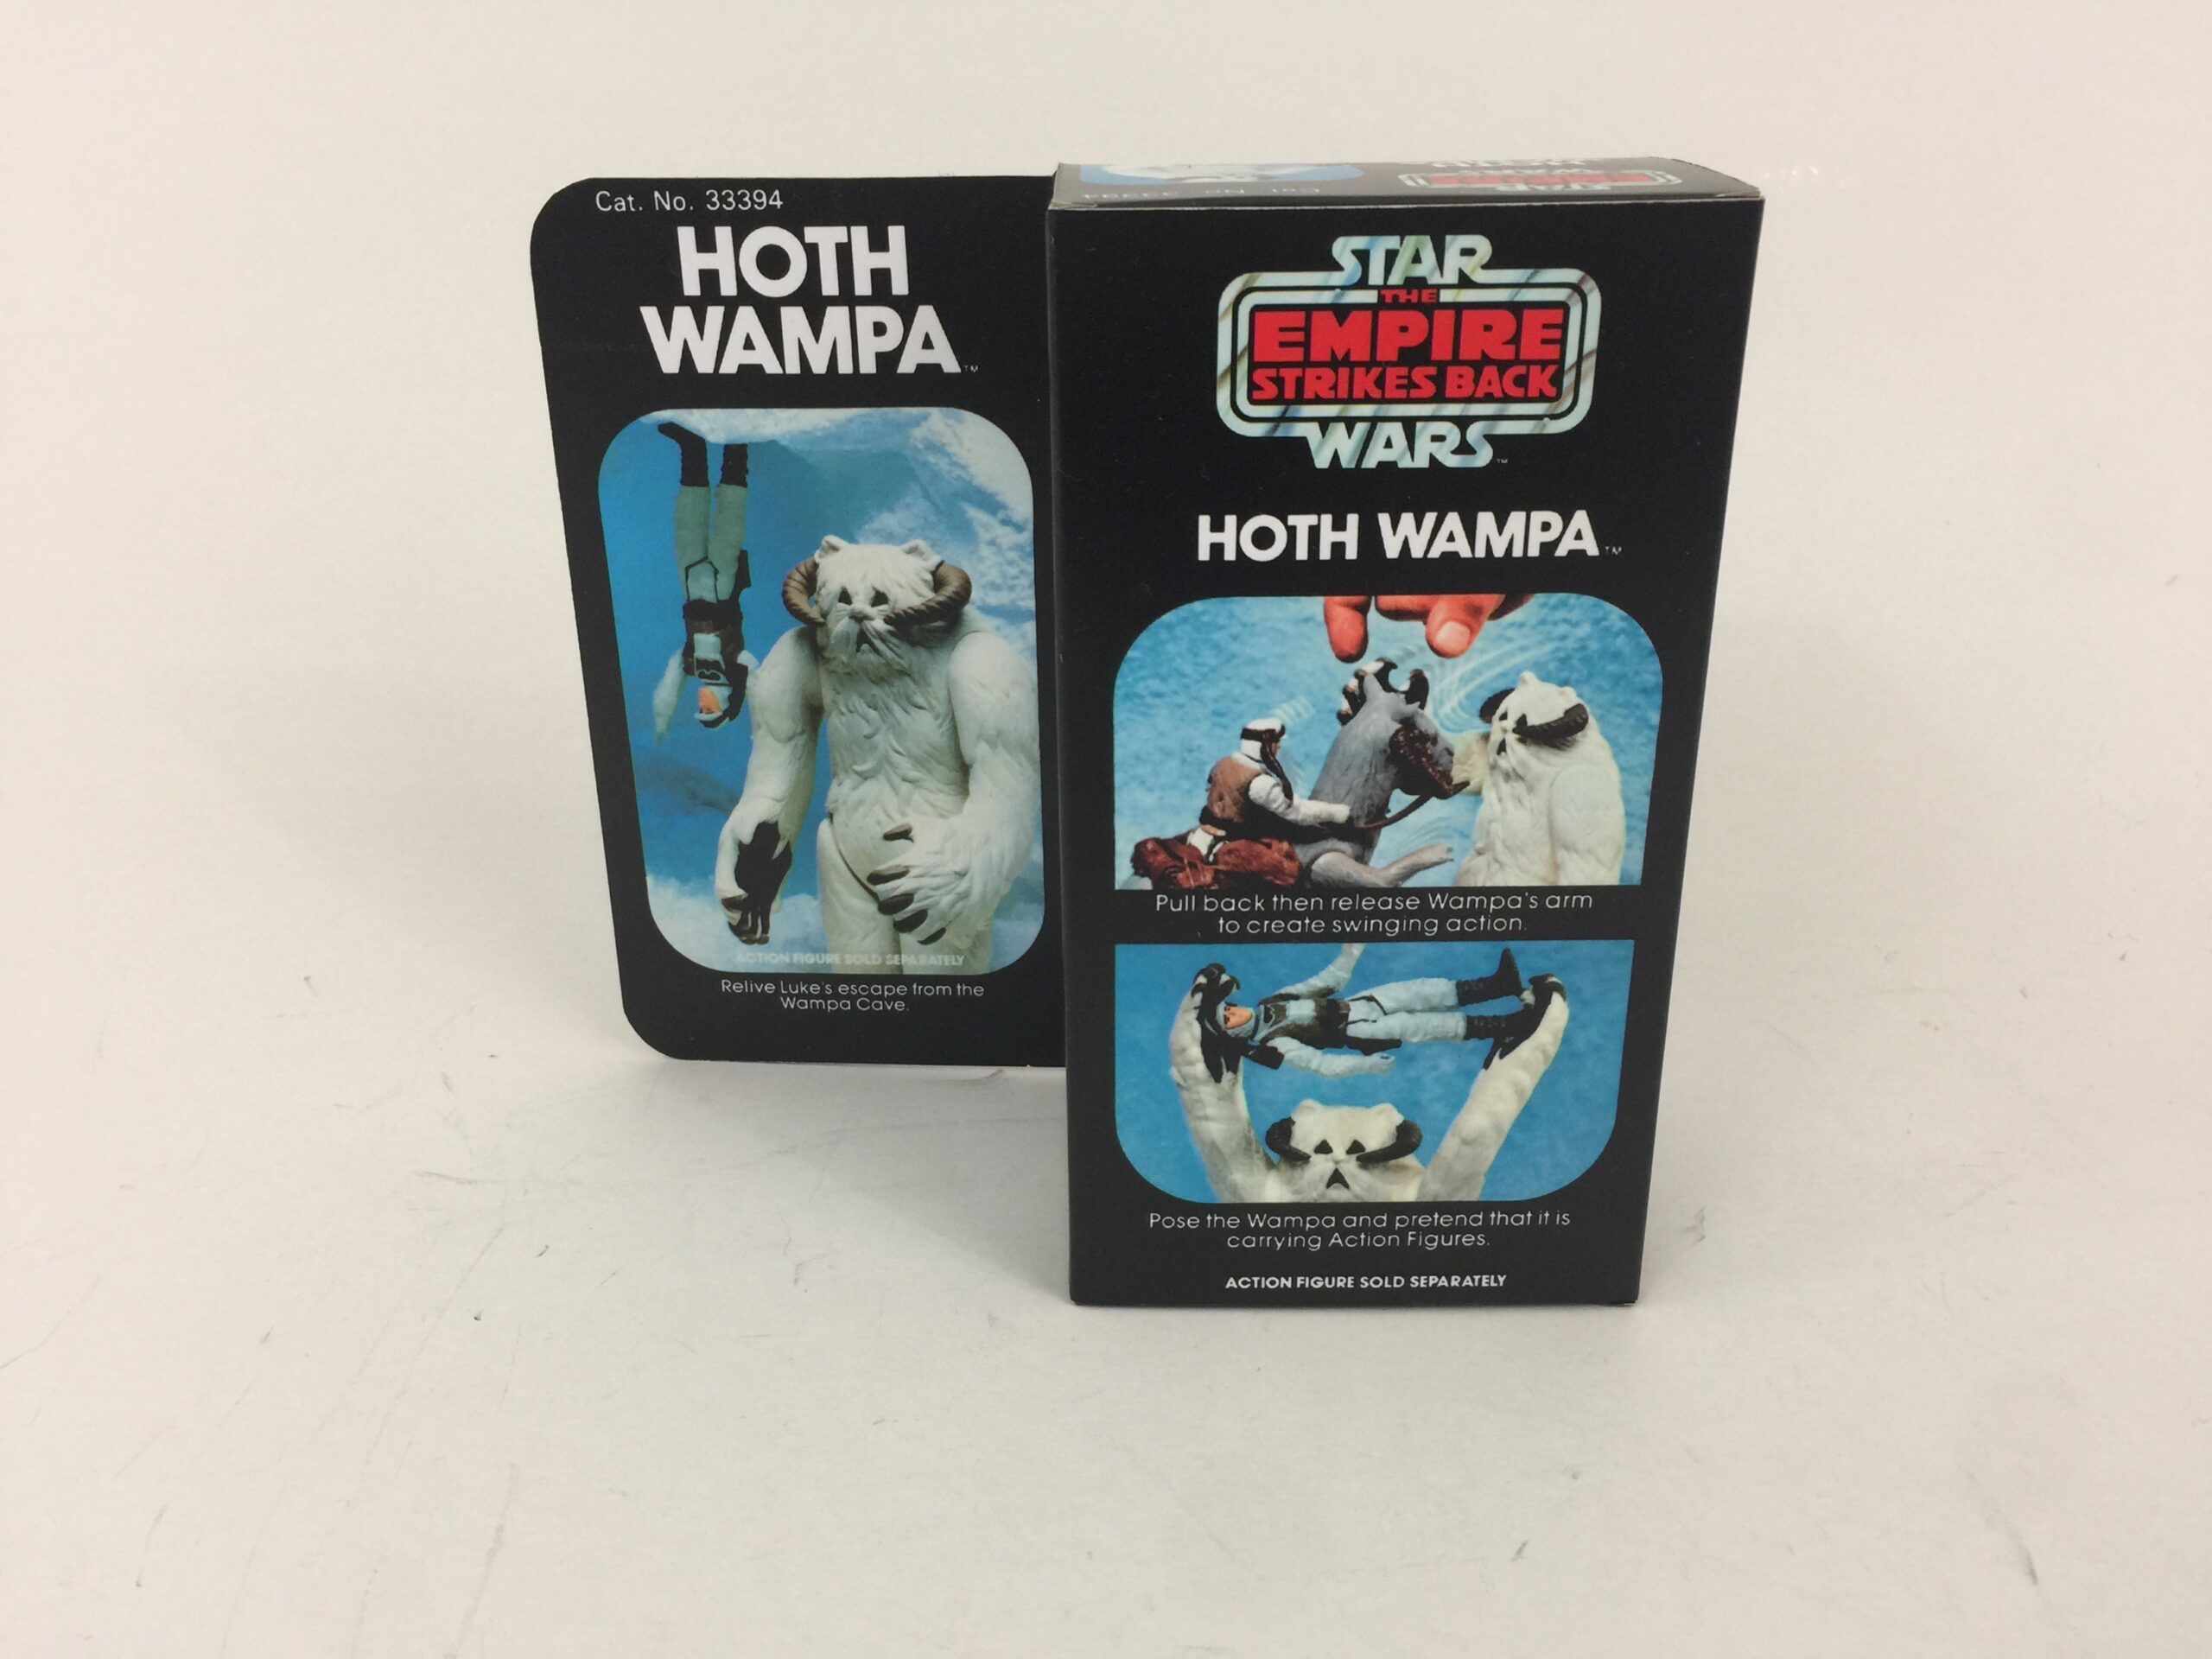 Replacement Vintage Star Wars The Empire Strikes Back Palitoy Hoth Wampa  box and inserts - Replicator Boxes and Inserts